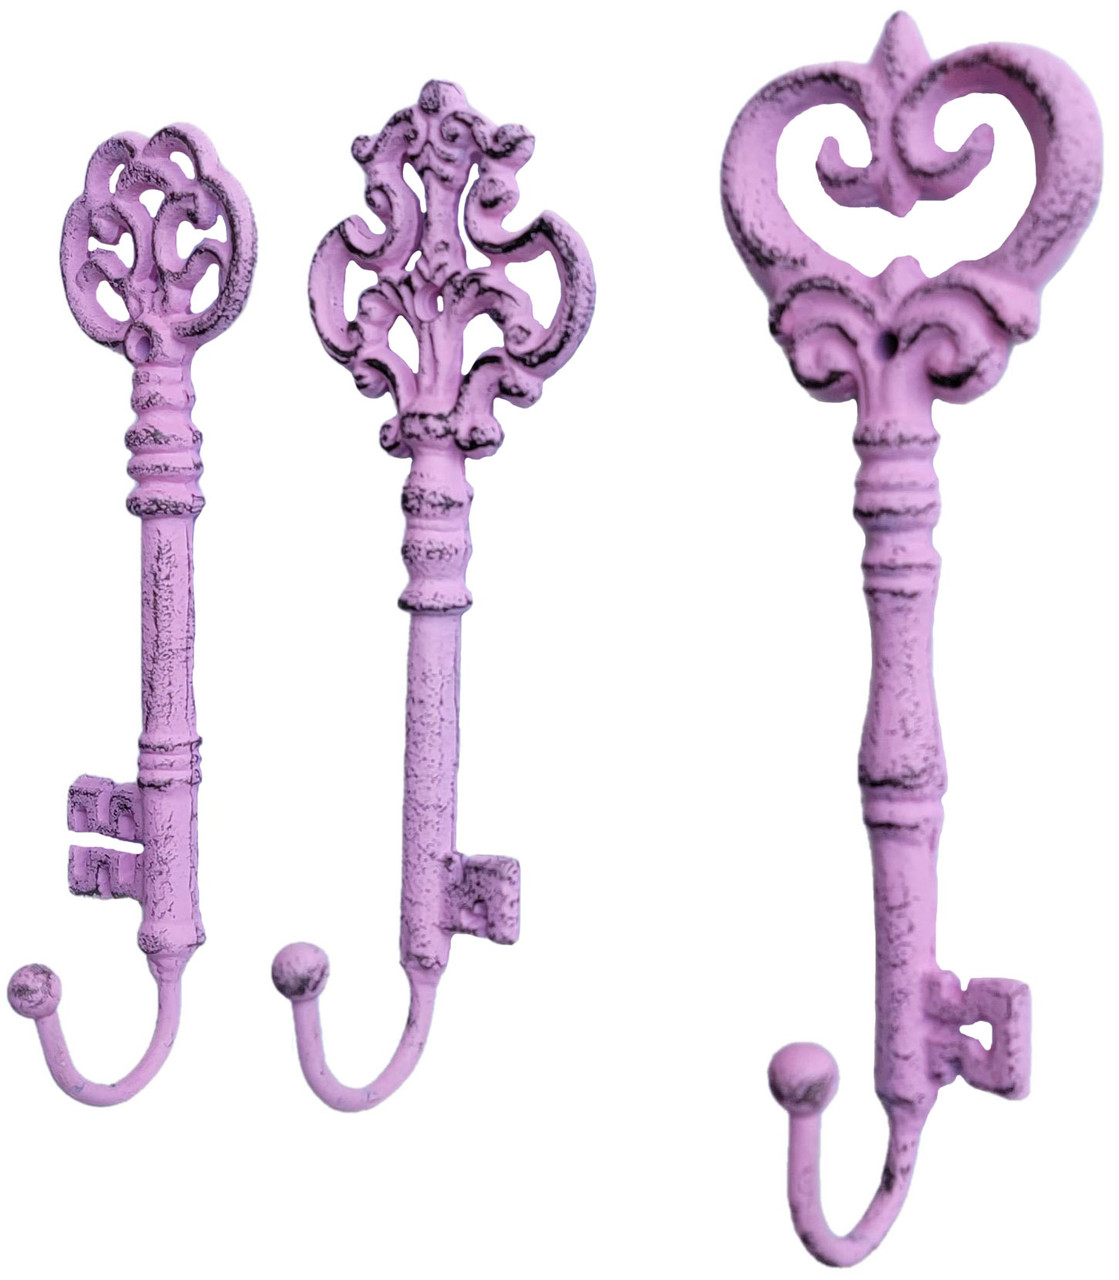  Wall Shabby Chic Hook Door Knob Décor Oil Rubbed Bronze or Pick  Color Cast Iron Towel Hook Jewelry Hanger : Handmade Products